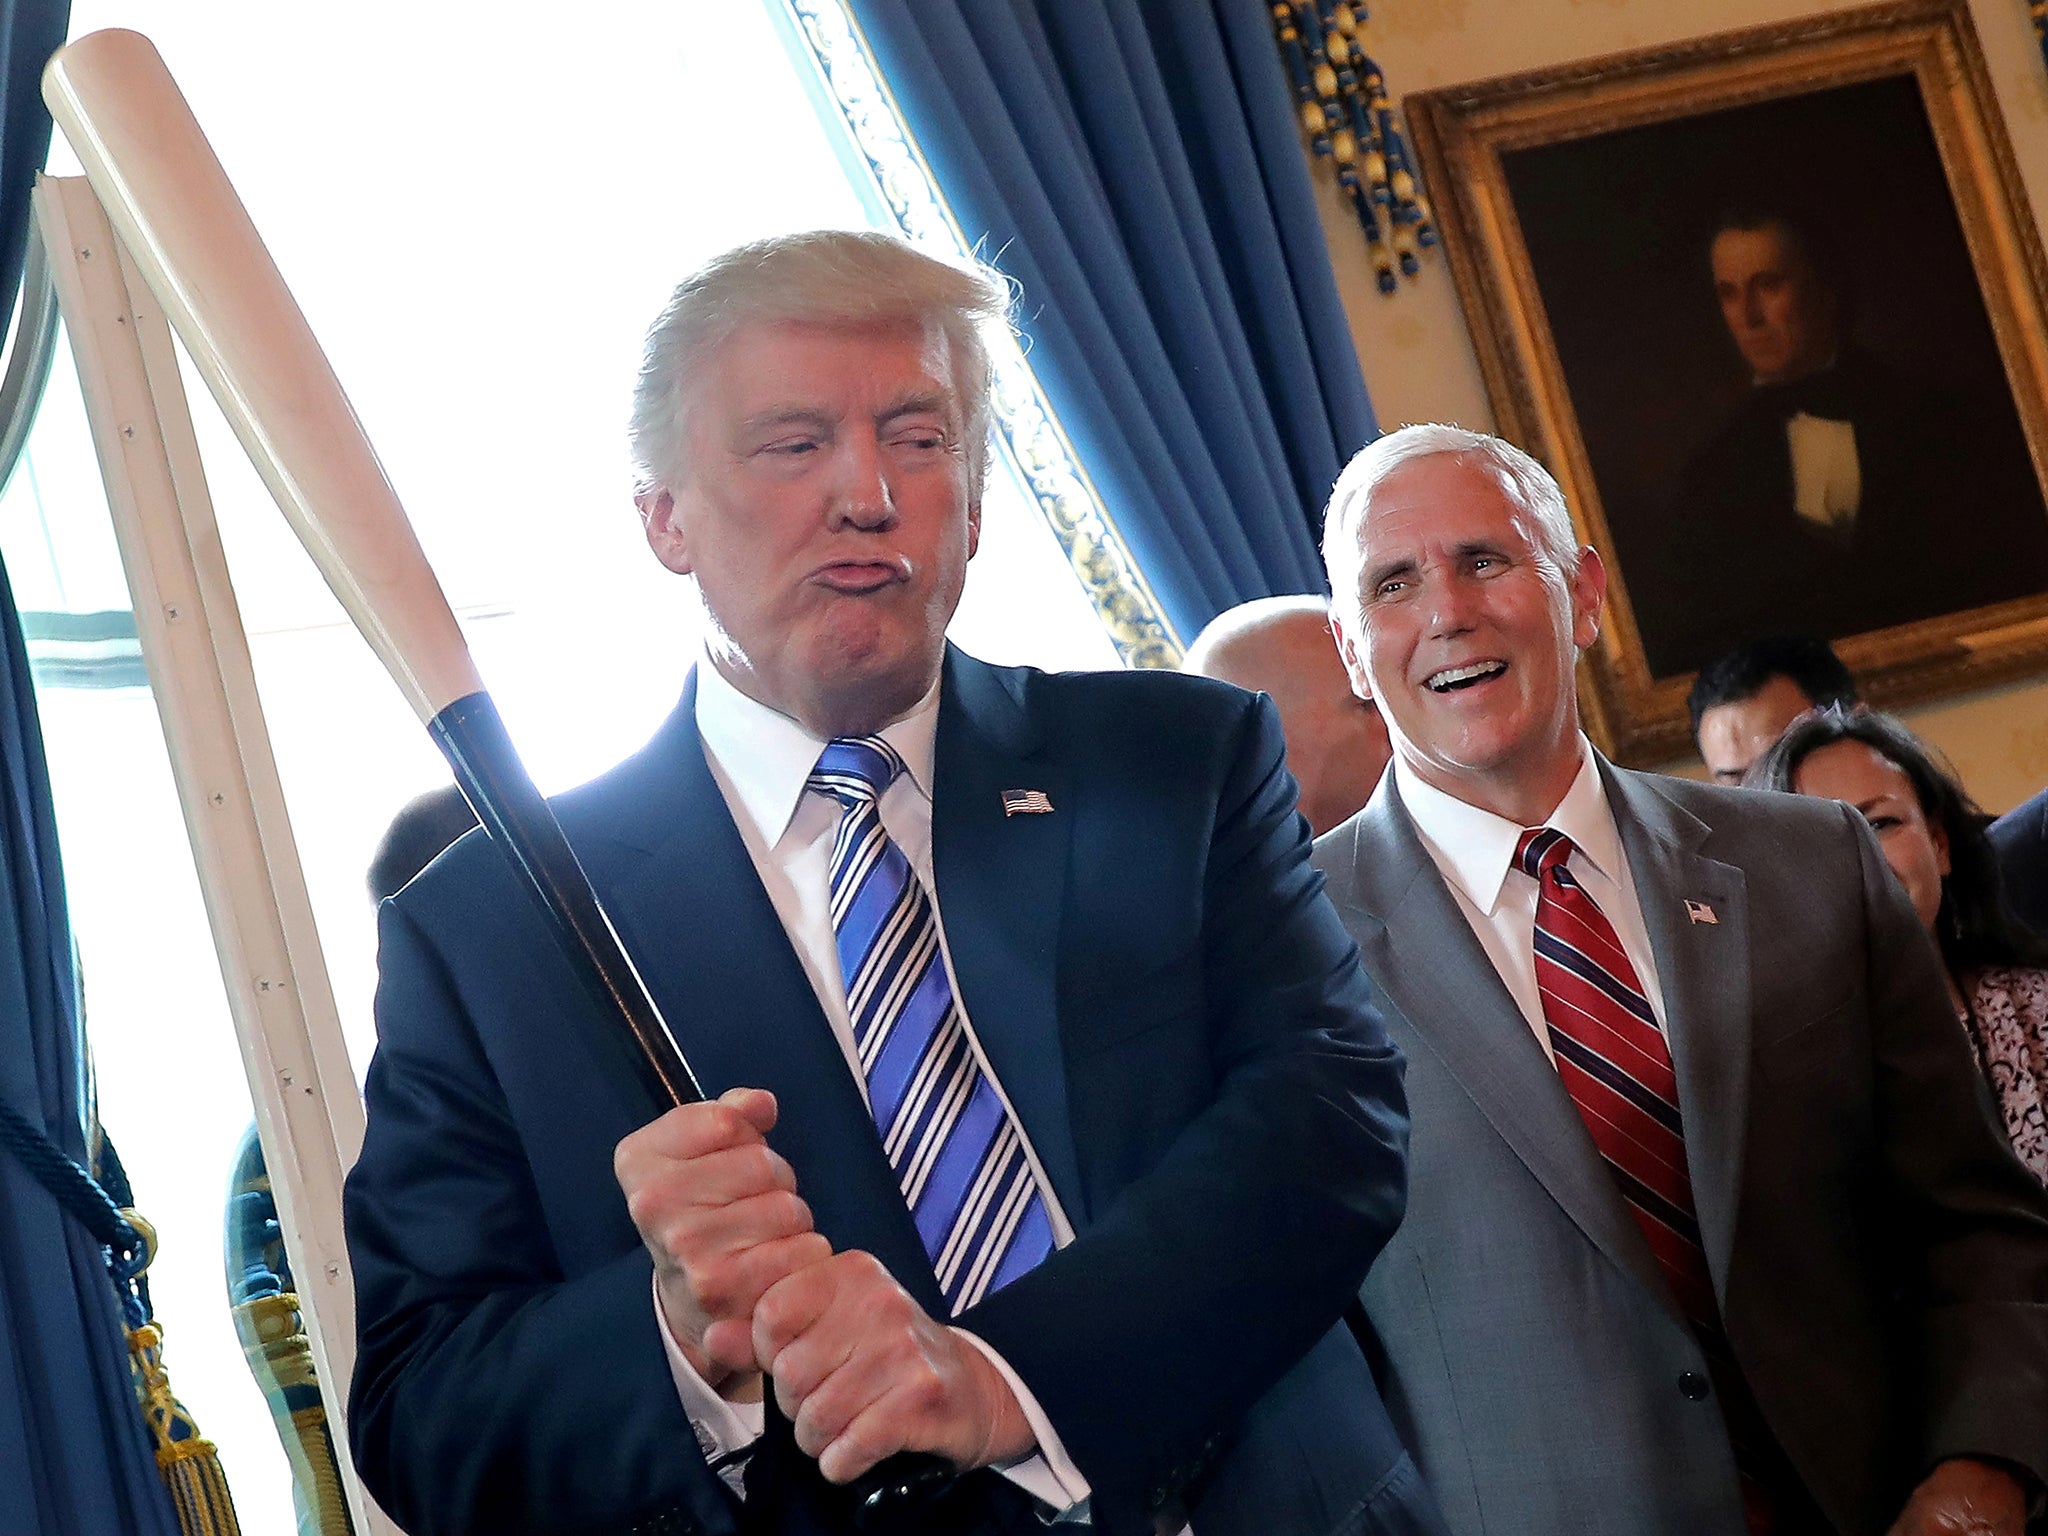 Mike Pence's perennial smile provides a stark contrast to the President's 'big stick' approach